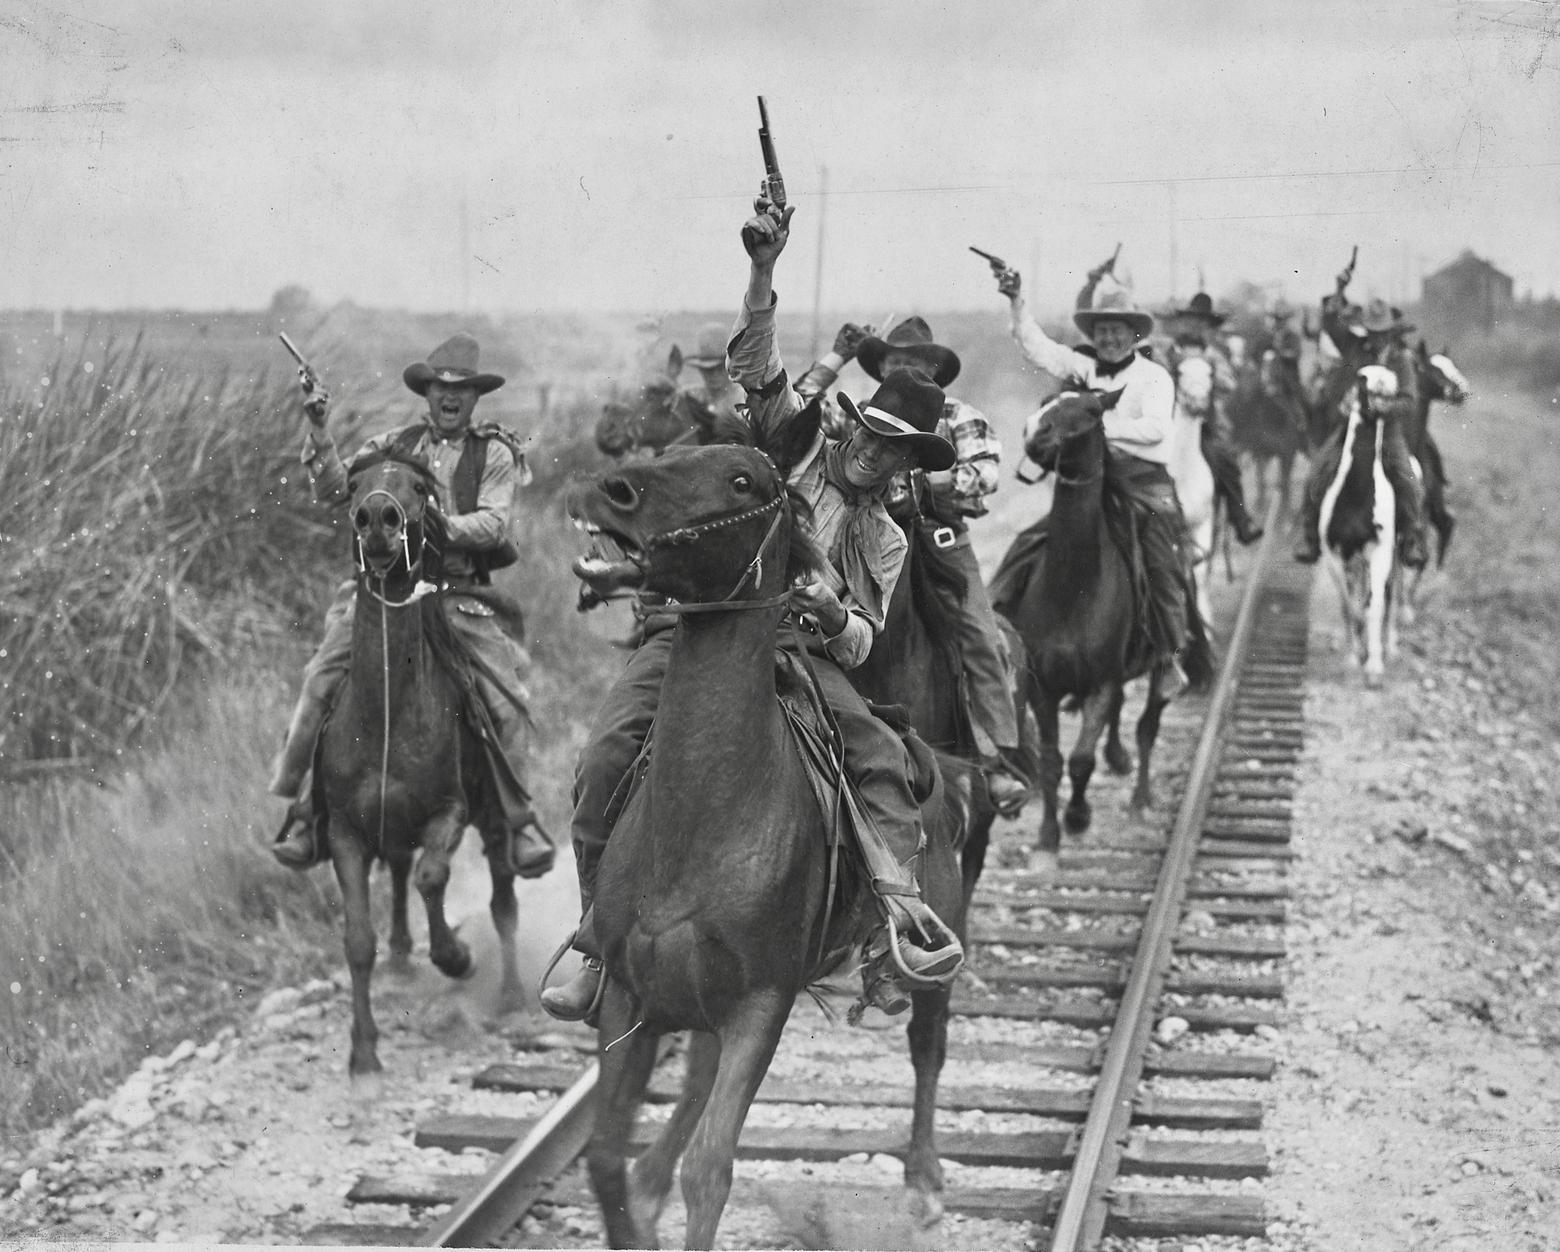 Old western films depict a version of the Wild West full of gun-slinging desperados, sheriffs brimming with bravado and a part of the country full of intrigue, action and standoffs in old corrals. It's altered our reality, and plays a key and disturbing role in our national psyche. Public domain image